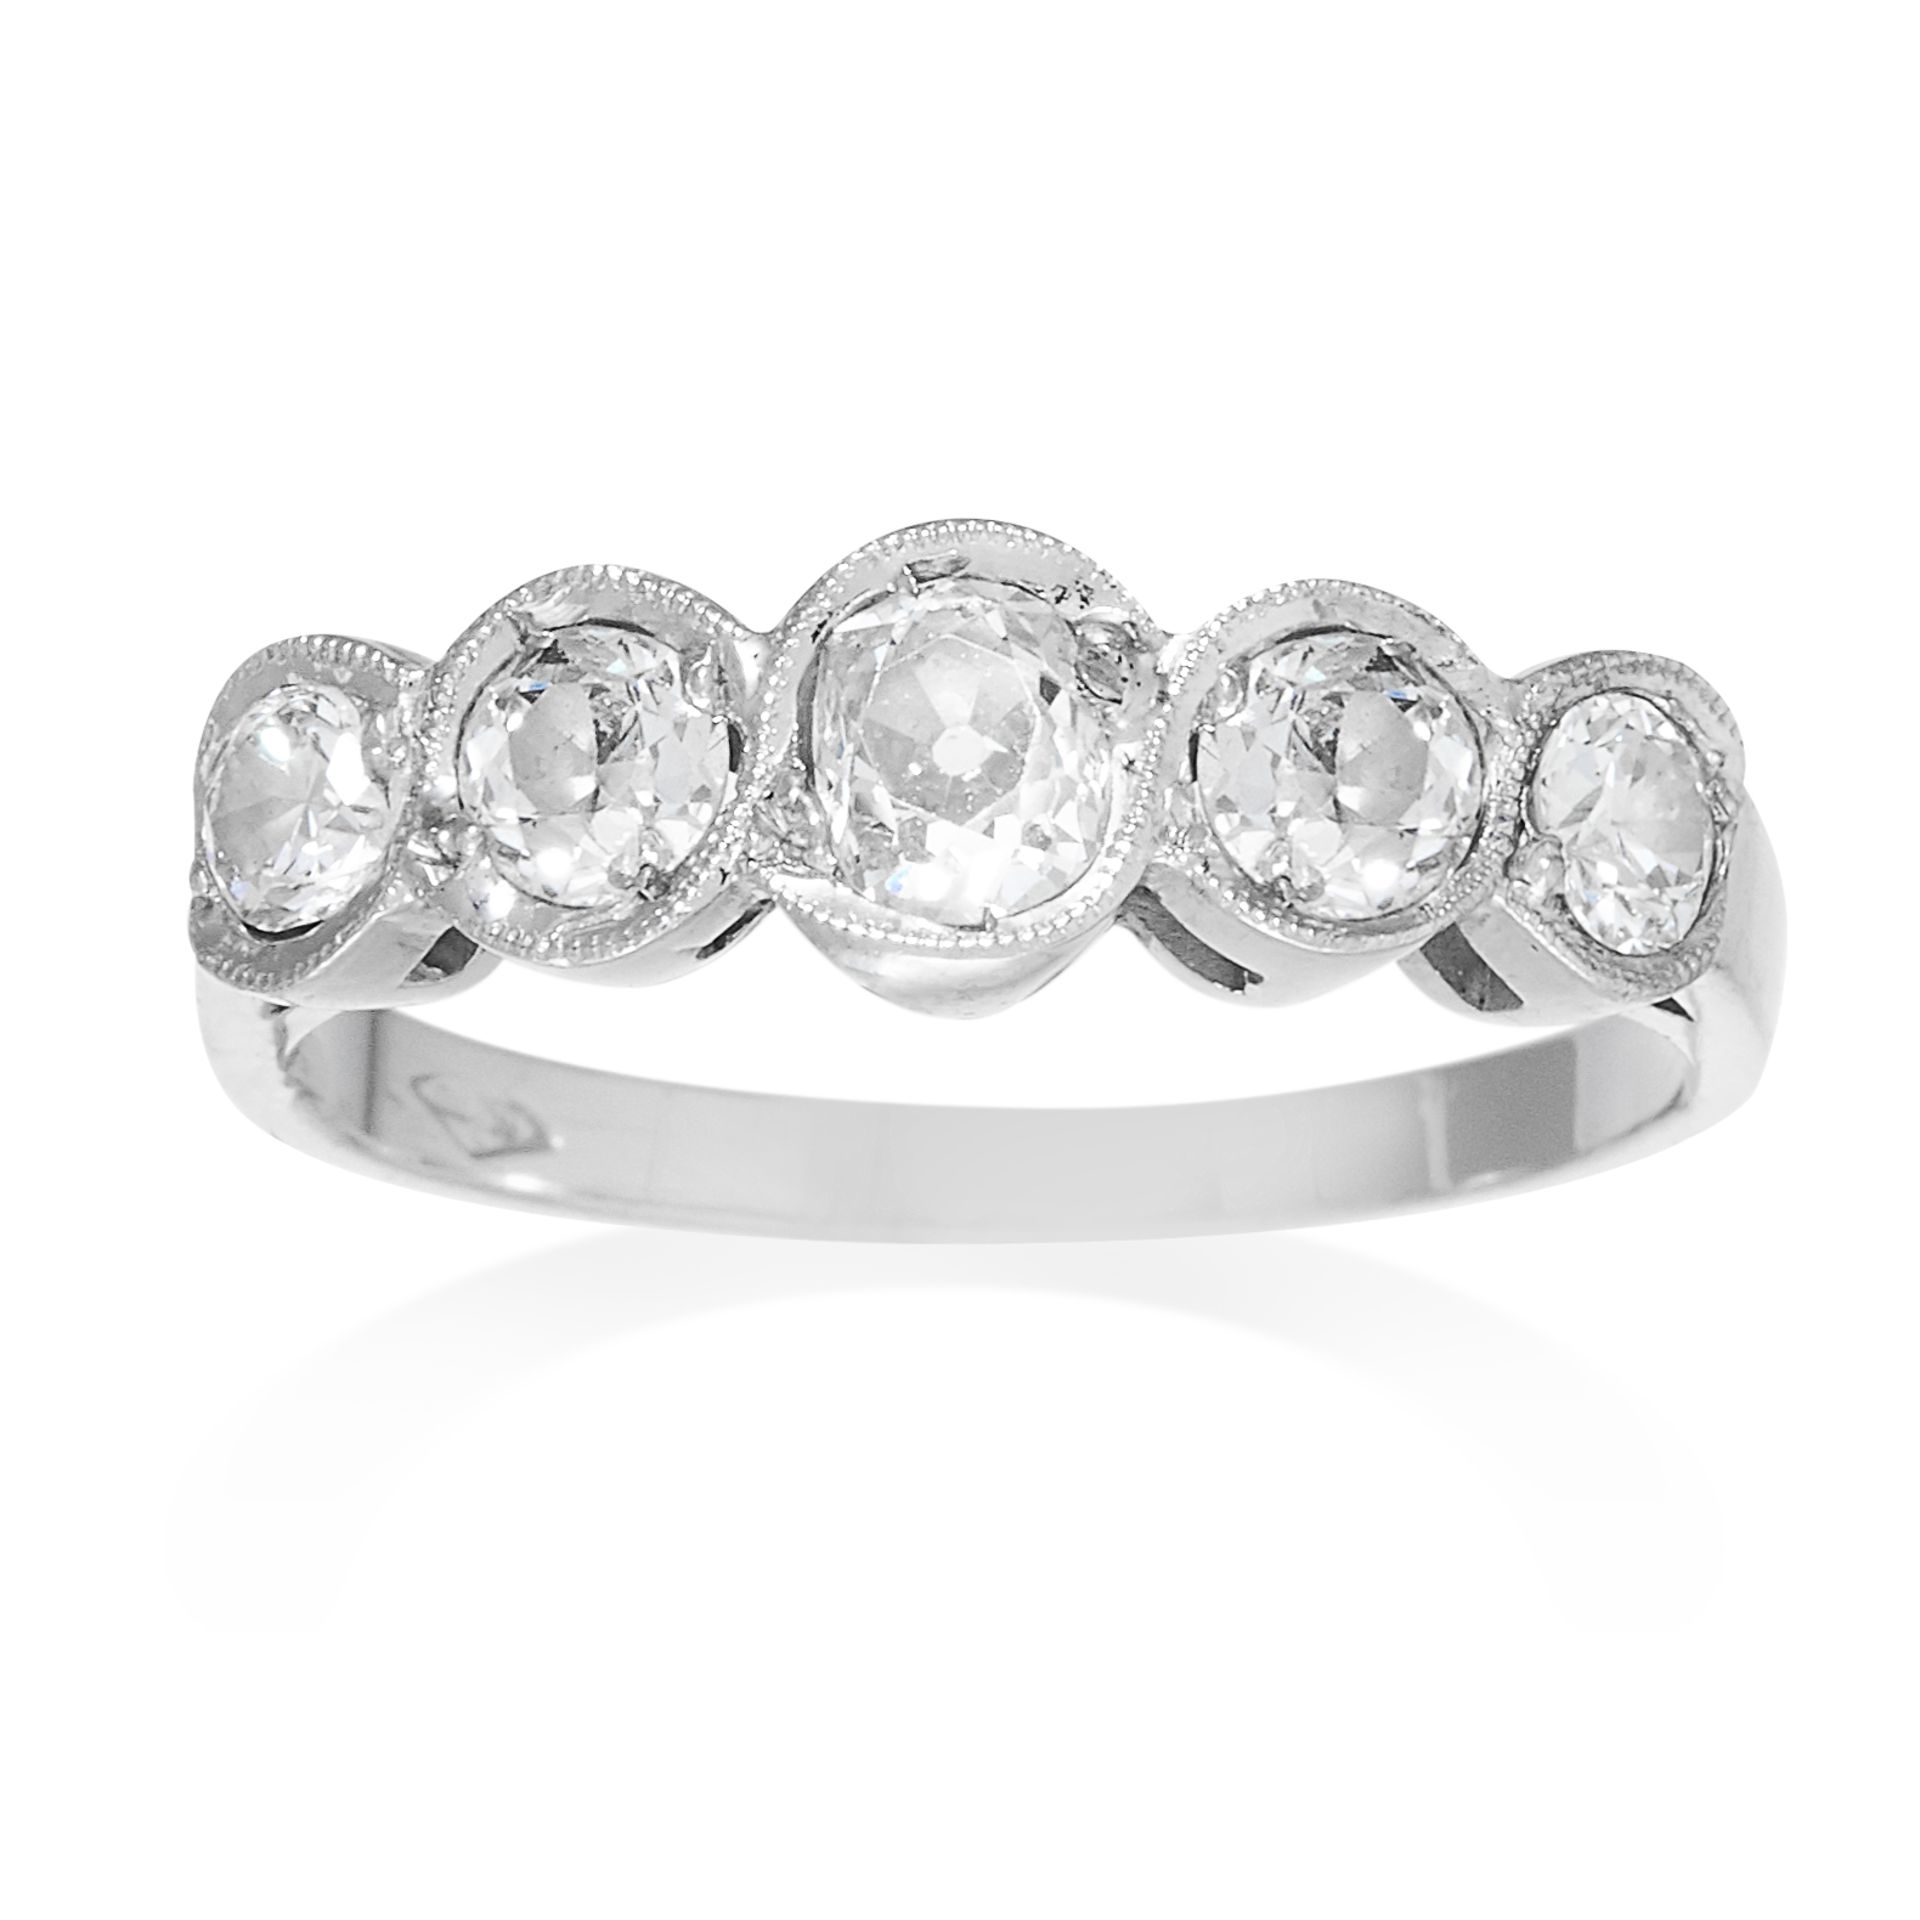 AN ANTIQUE DIAMOND FIVE STONE RING in platinum or white gold, set with a row of five graduated old